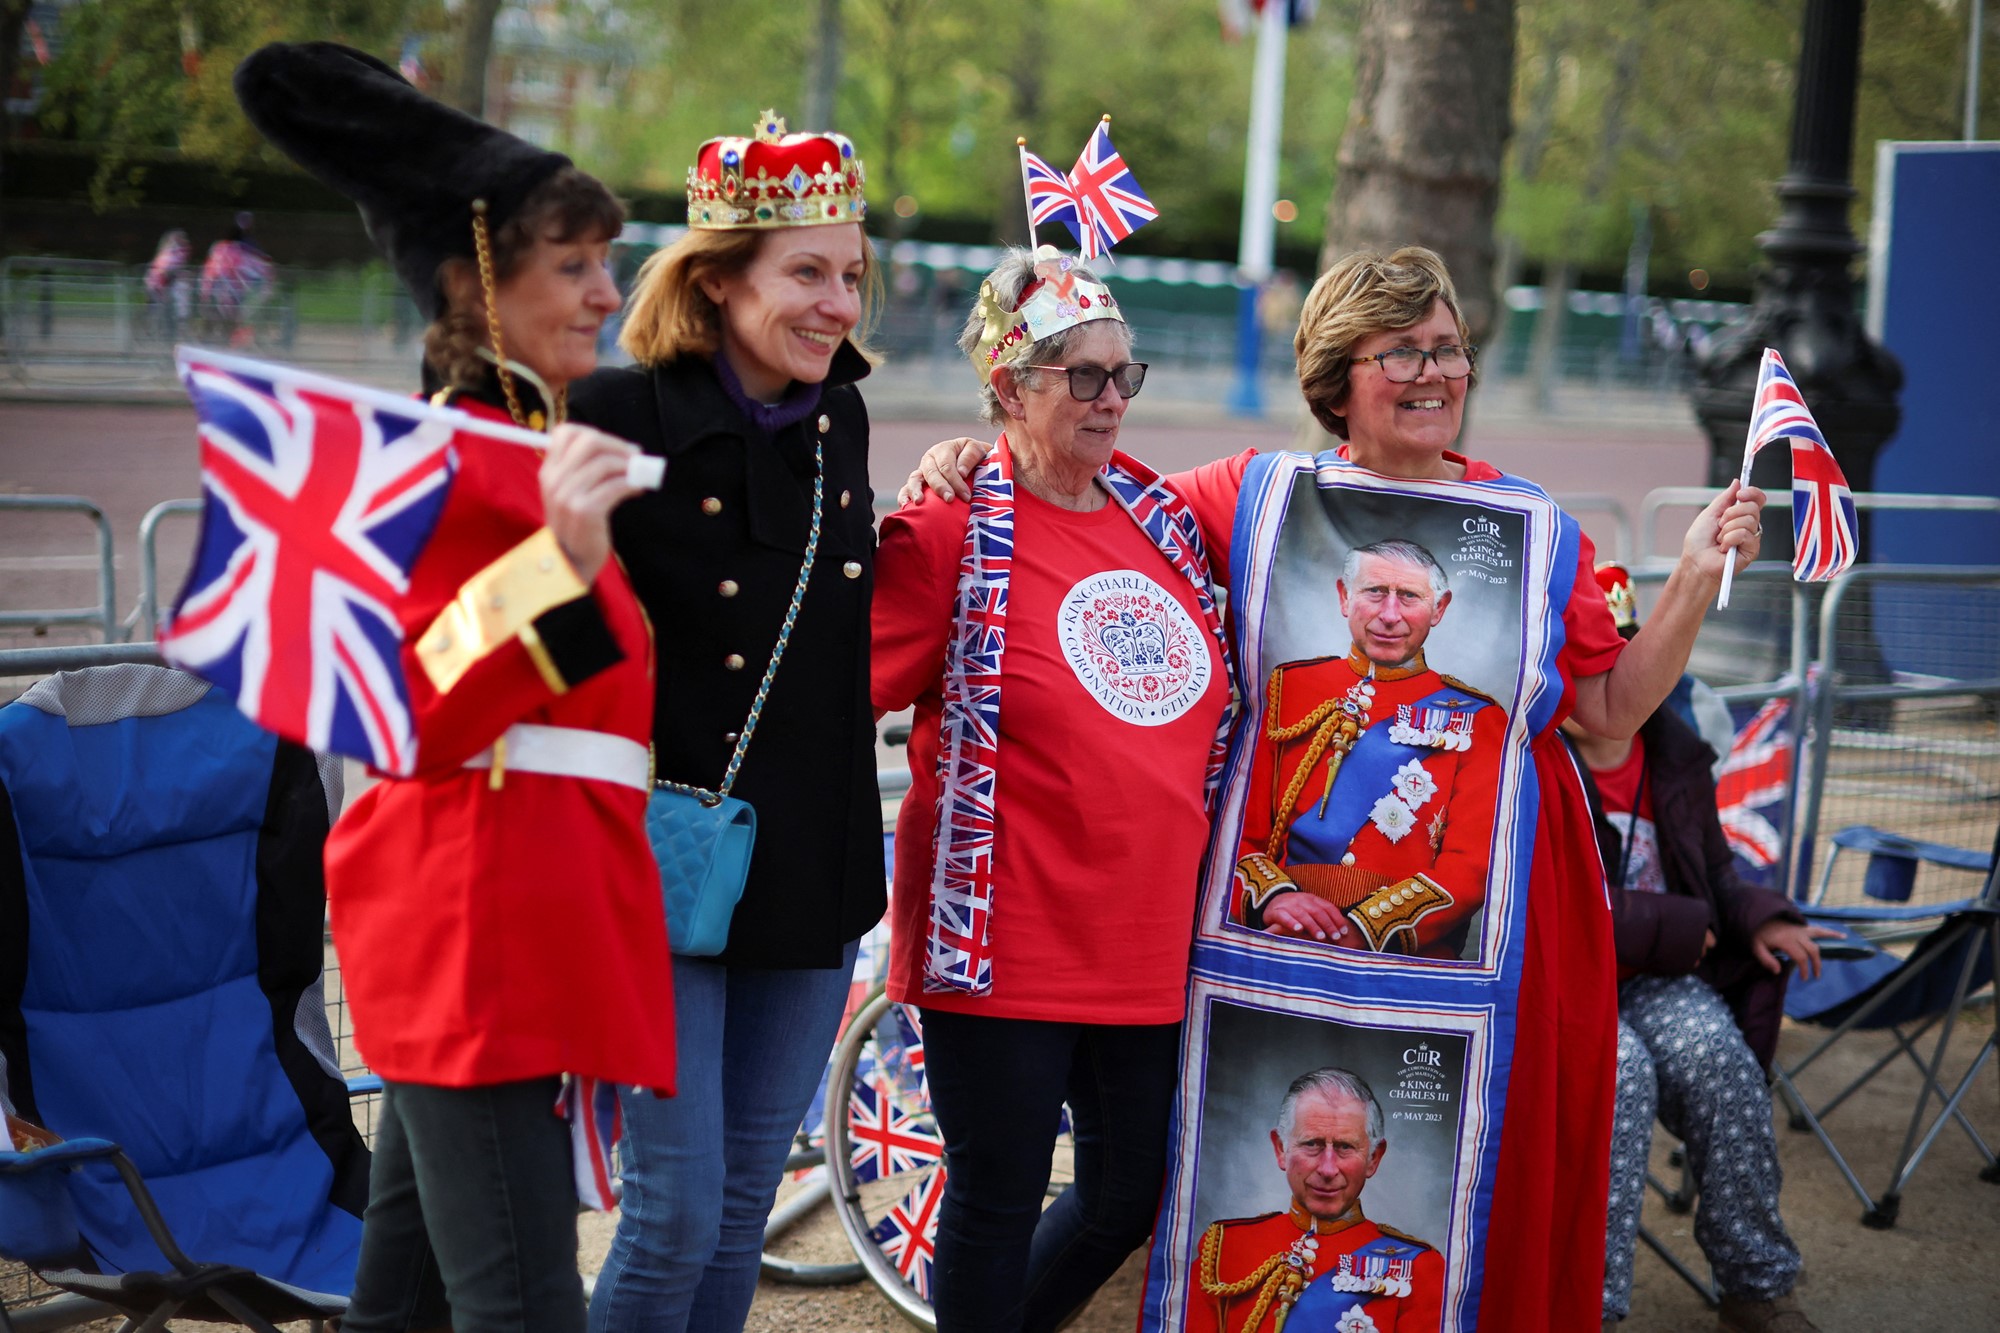 Royal fans in royal outfits stand together for a photo on the Mall in London